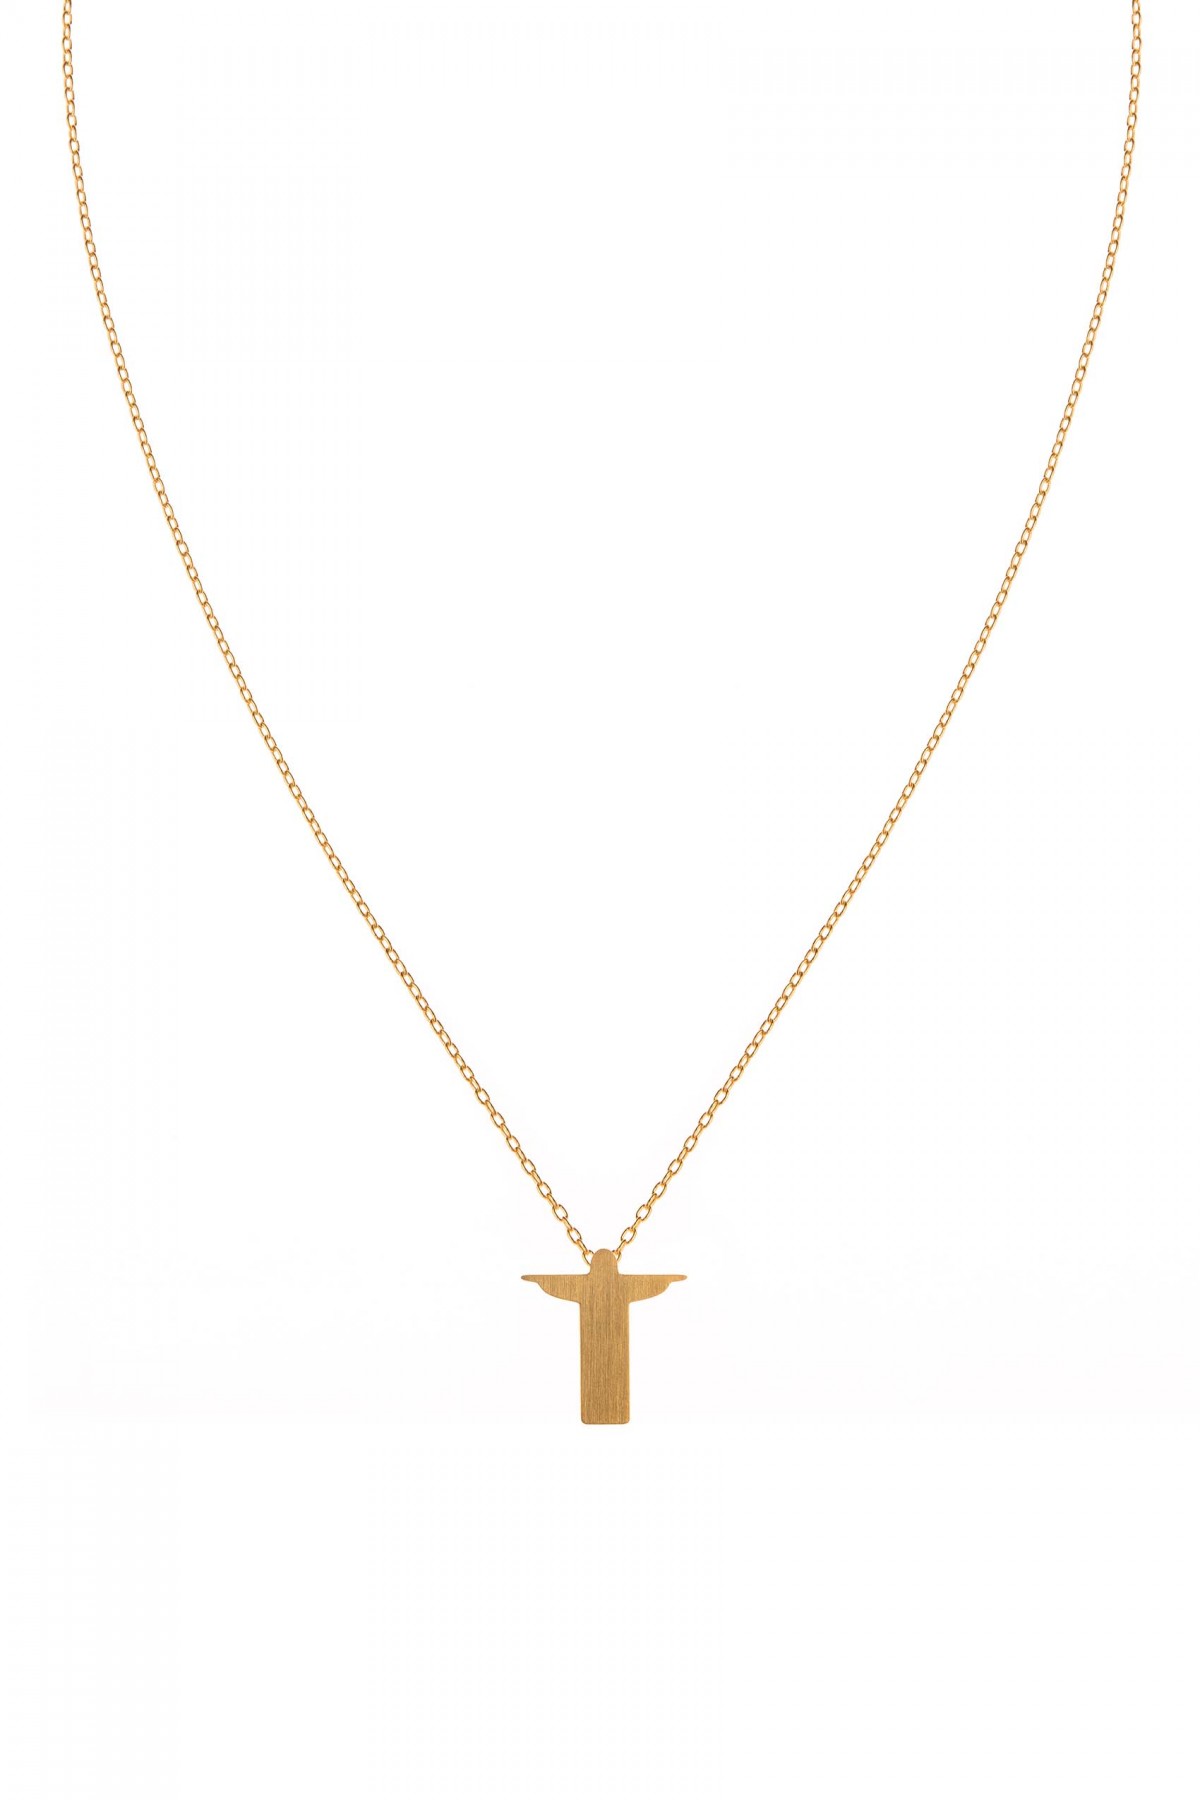 Christ the Redeemer Necklace